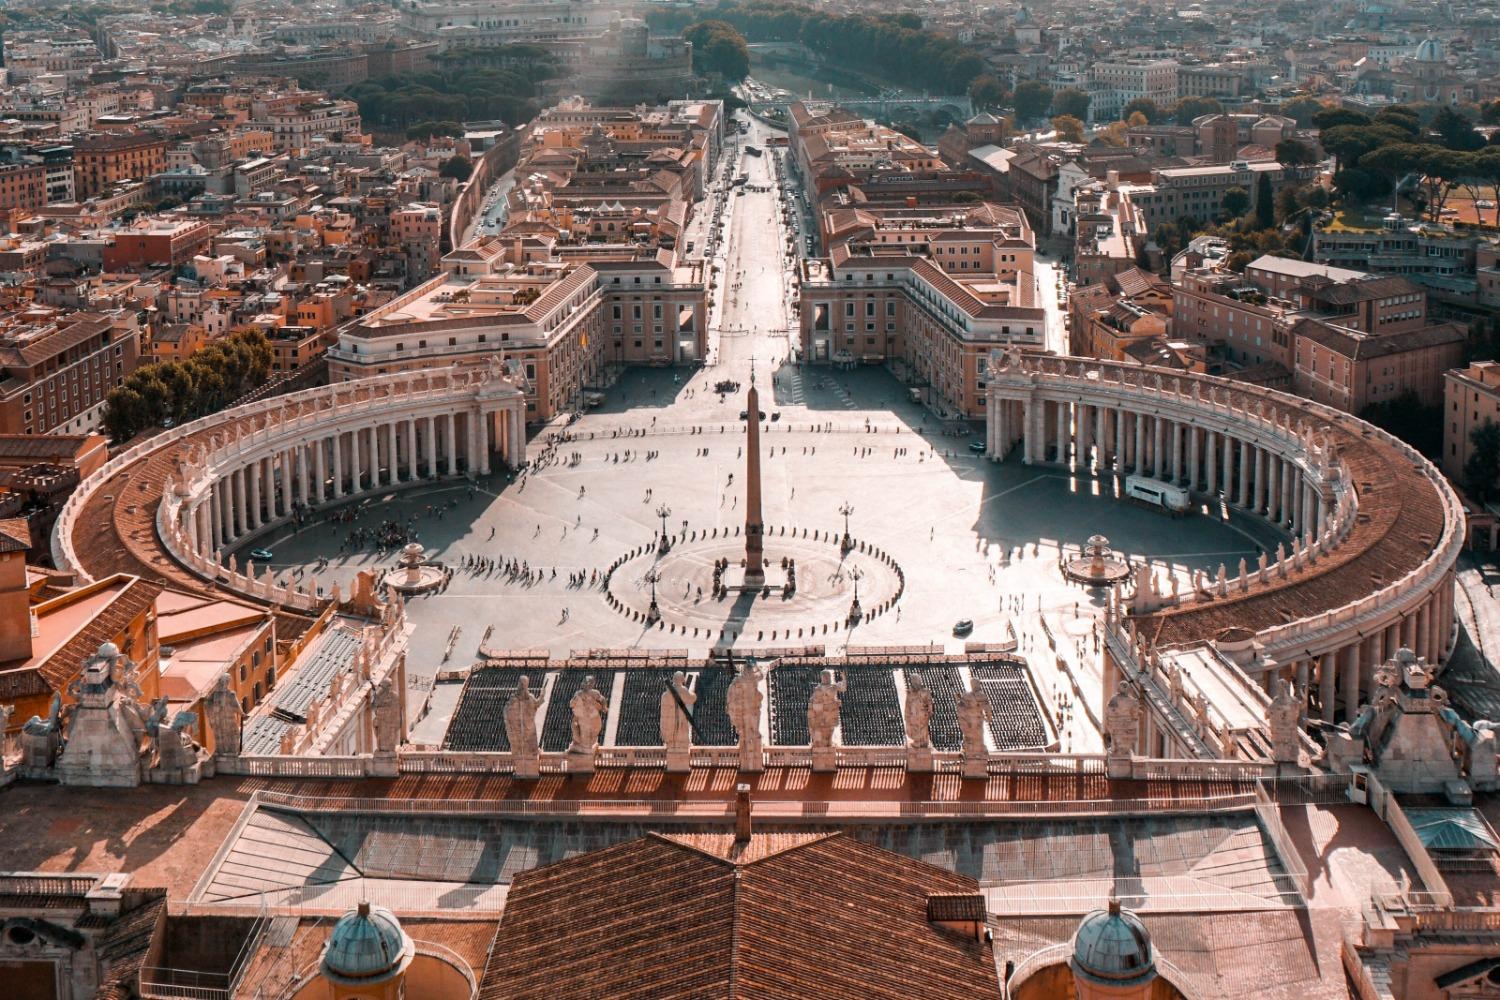 The Vatican Obelisk and St. Peter&#039;s Square from the Dome of St. Peter&#039;s Basilica